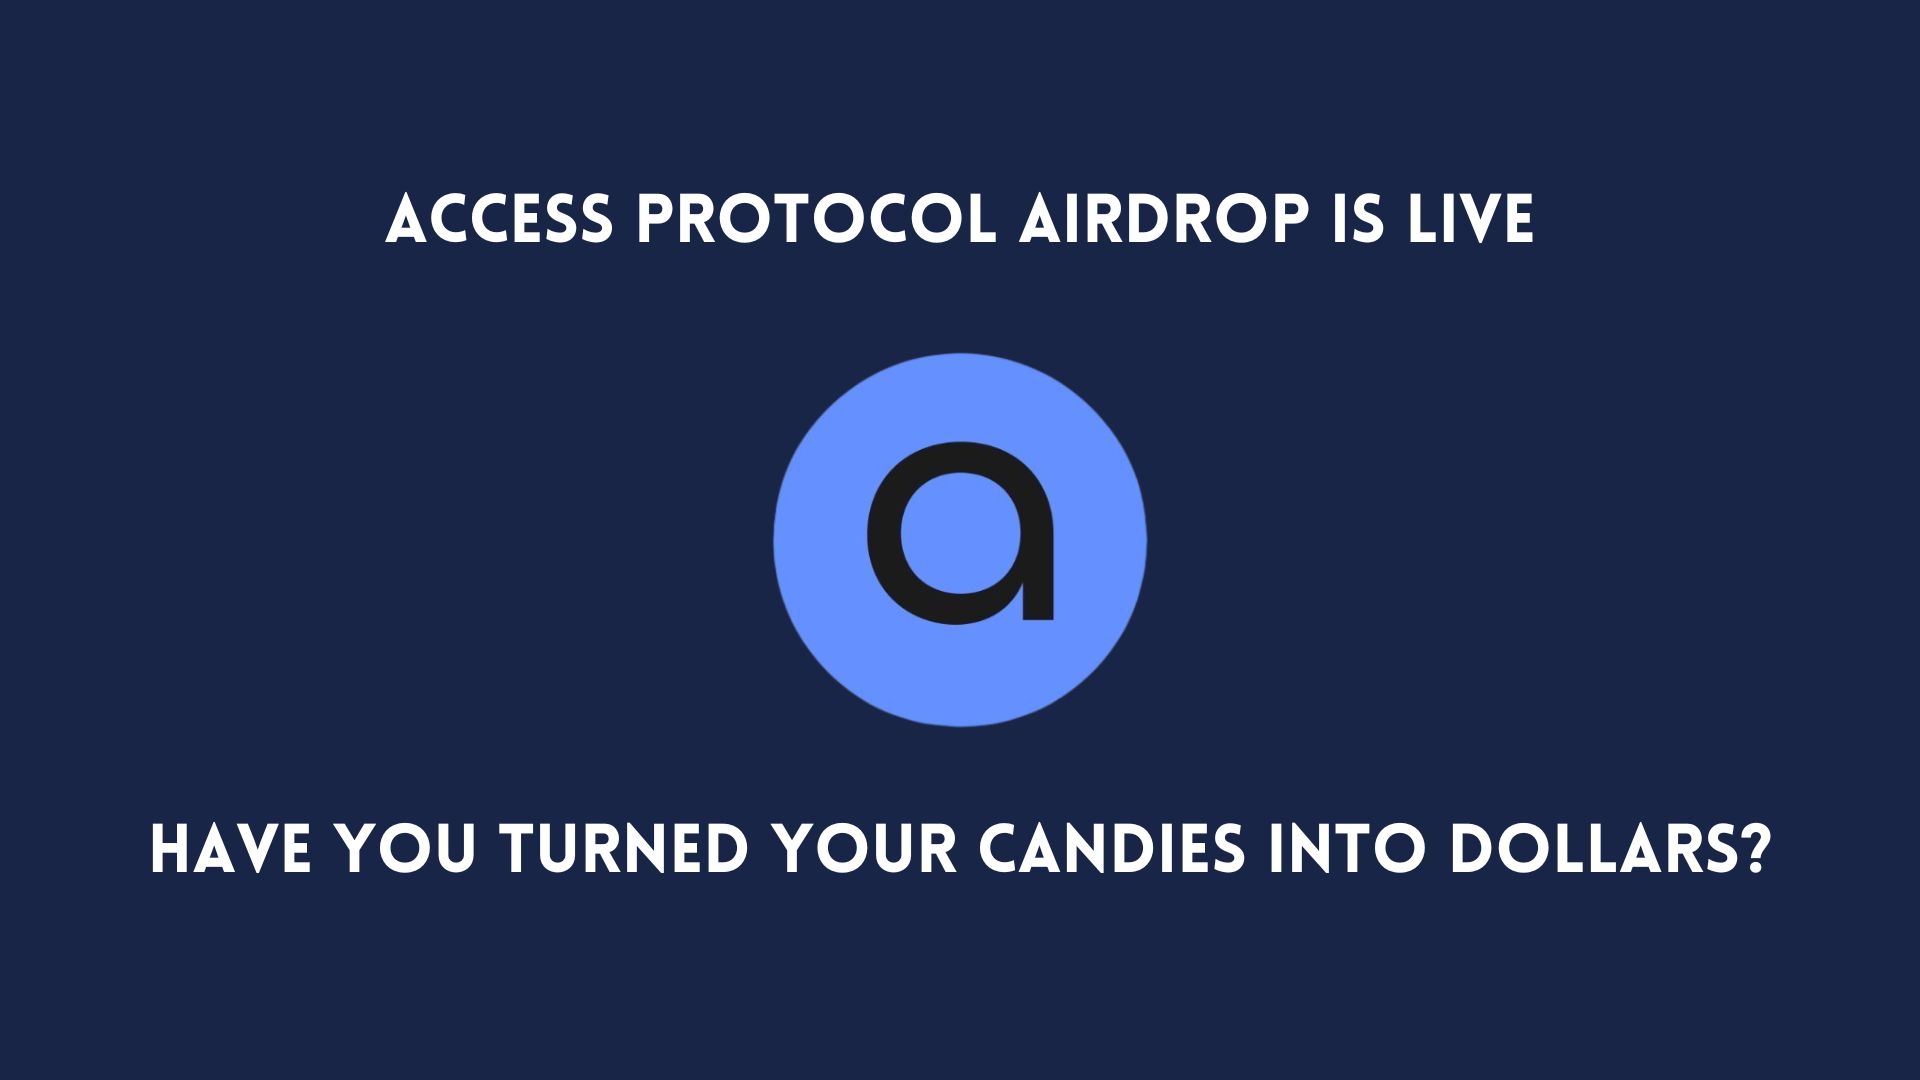 @jerrythefarmer/access-protocol-airdrop-is-live-did-you-turn-your-candies-into-cash-usdusdusd